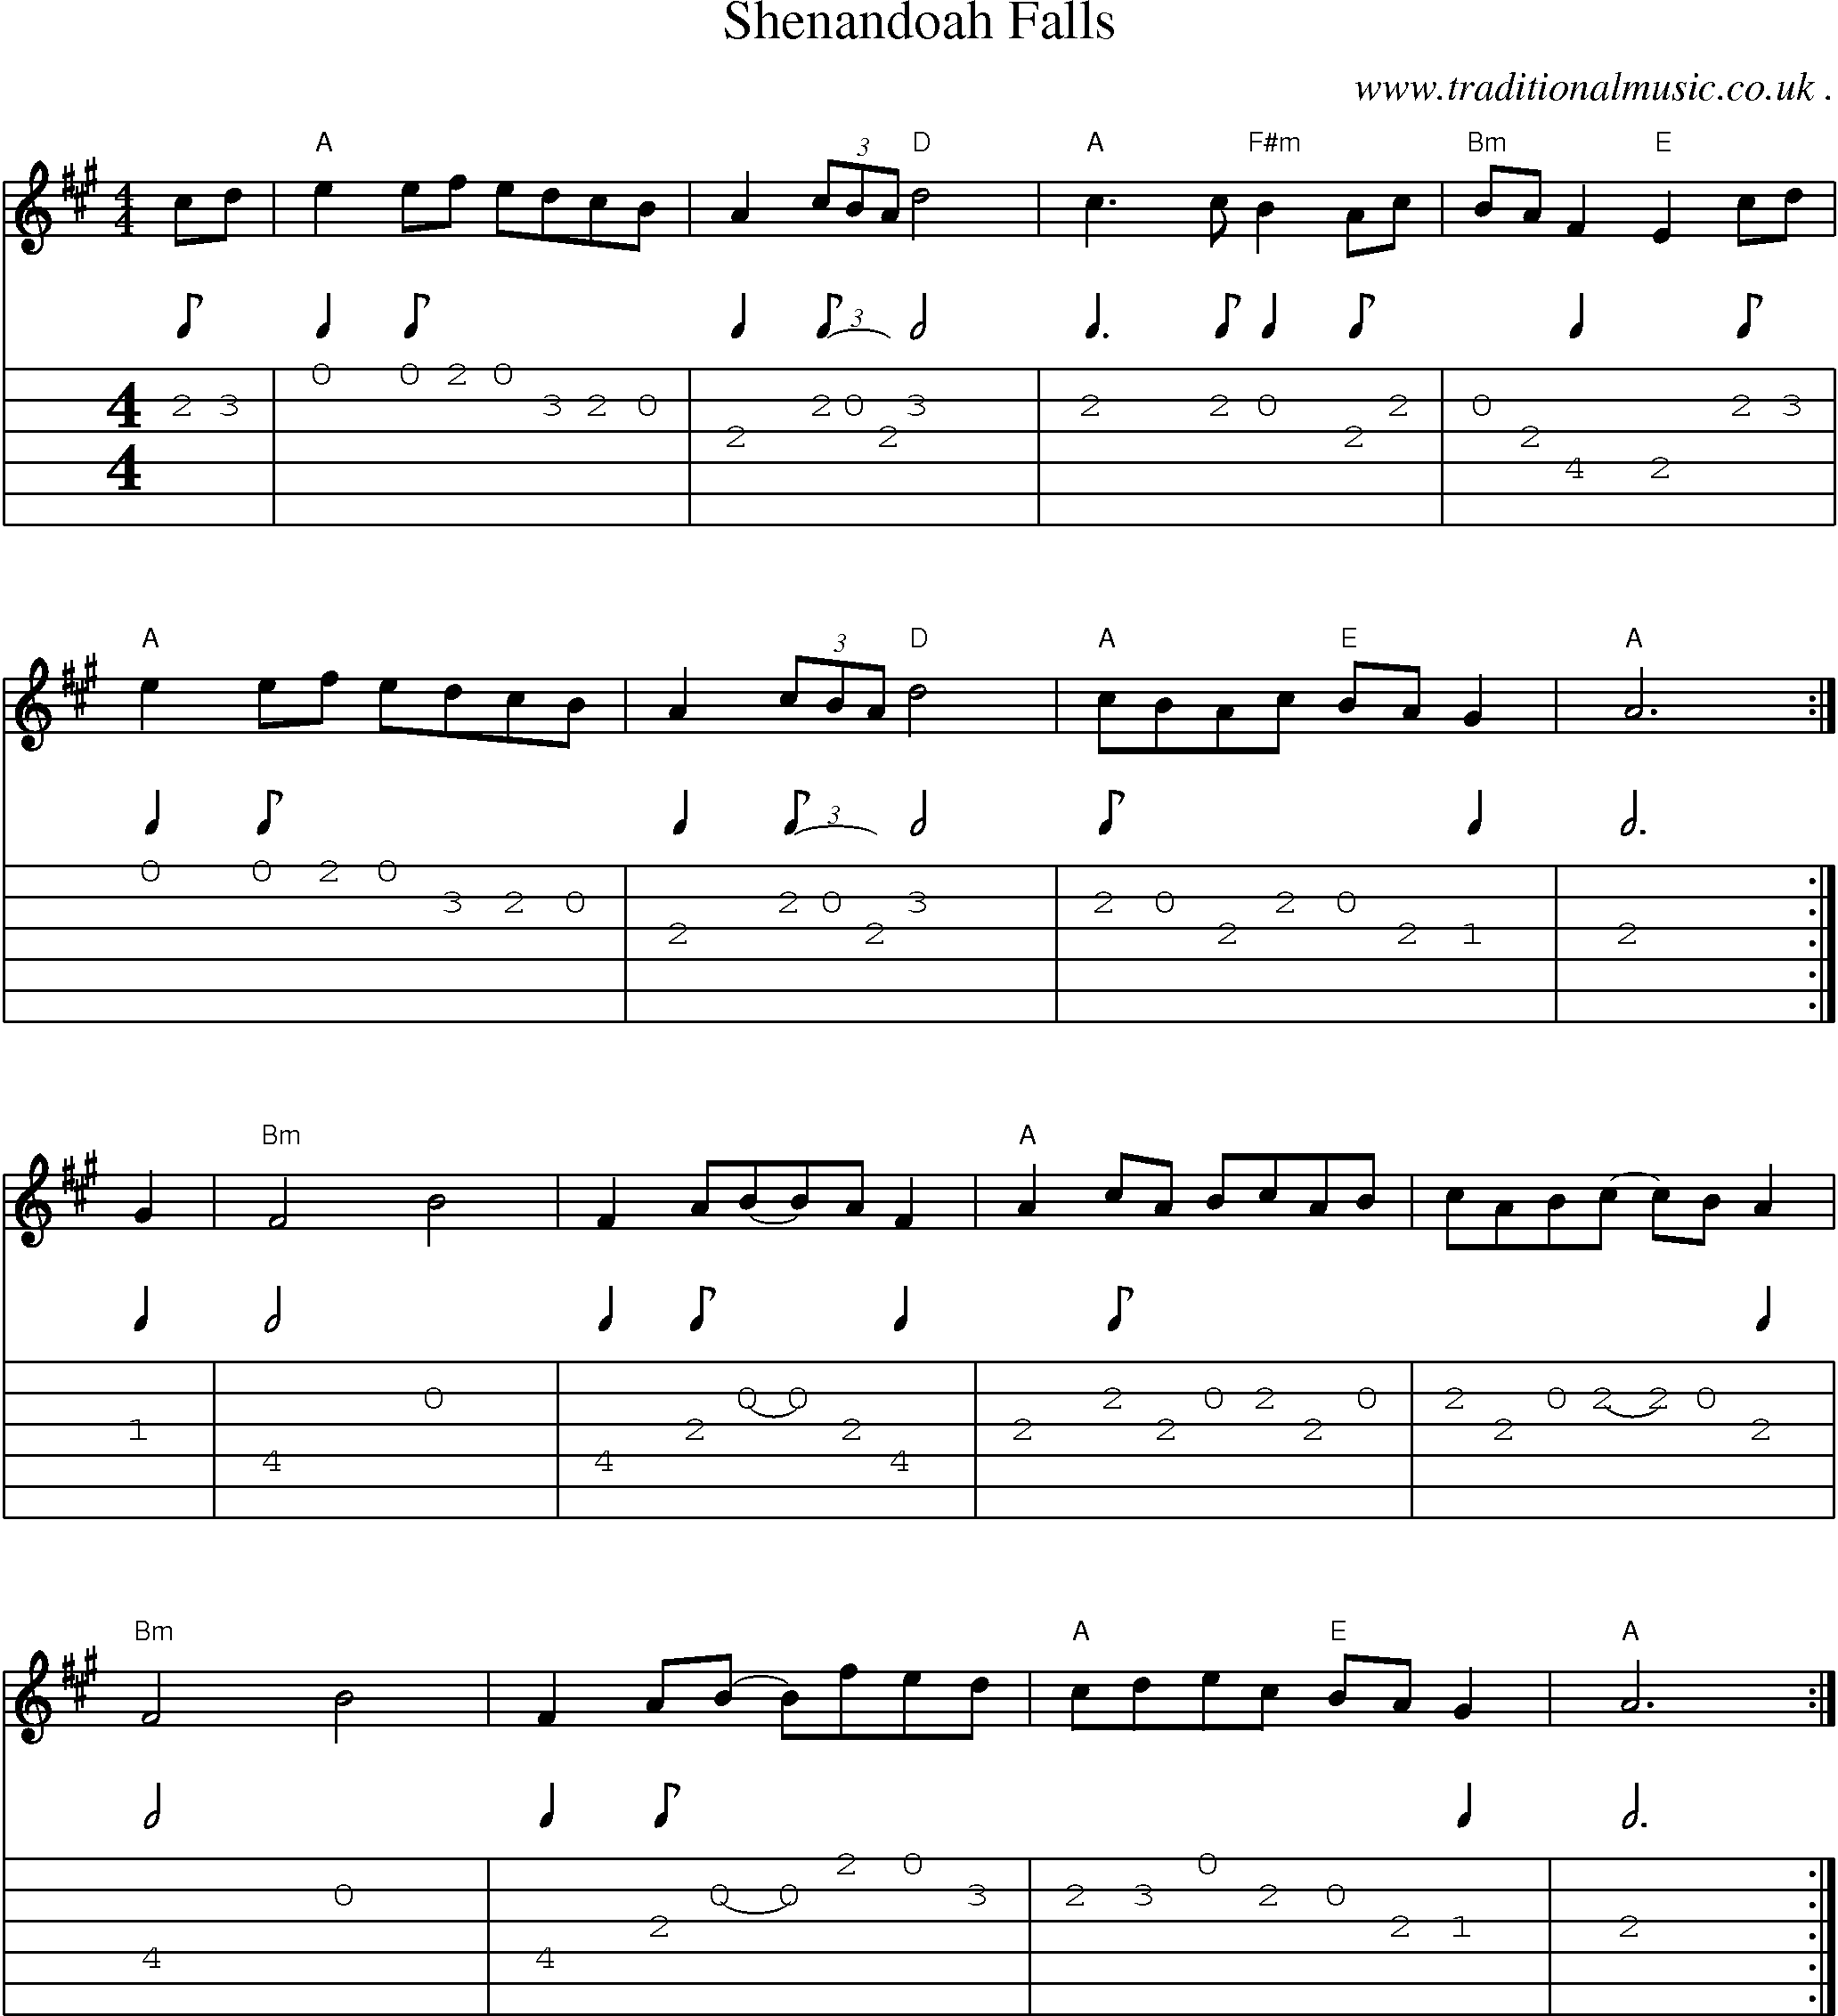 Music Score and Guitar Tabs for Shenandoah Falls